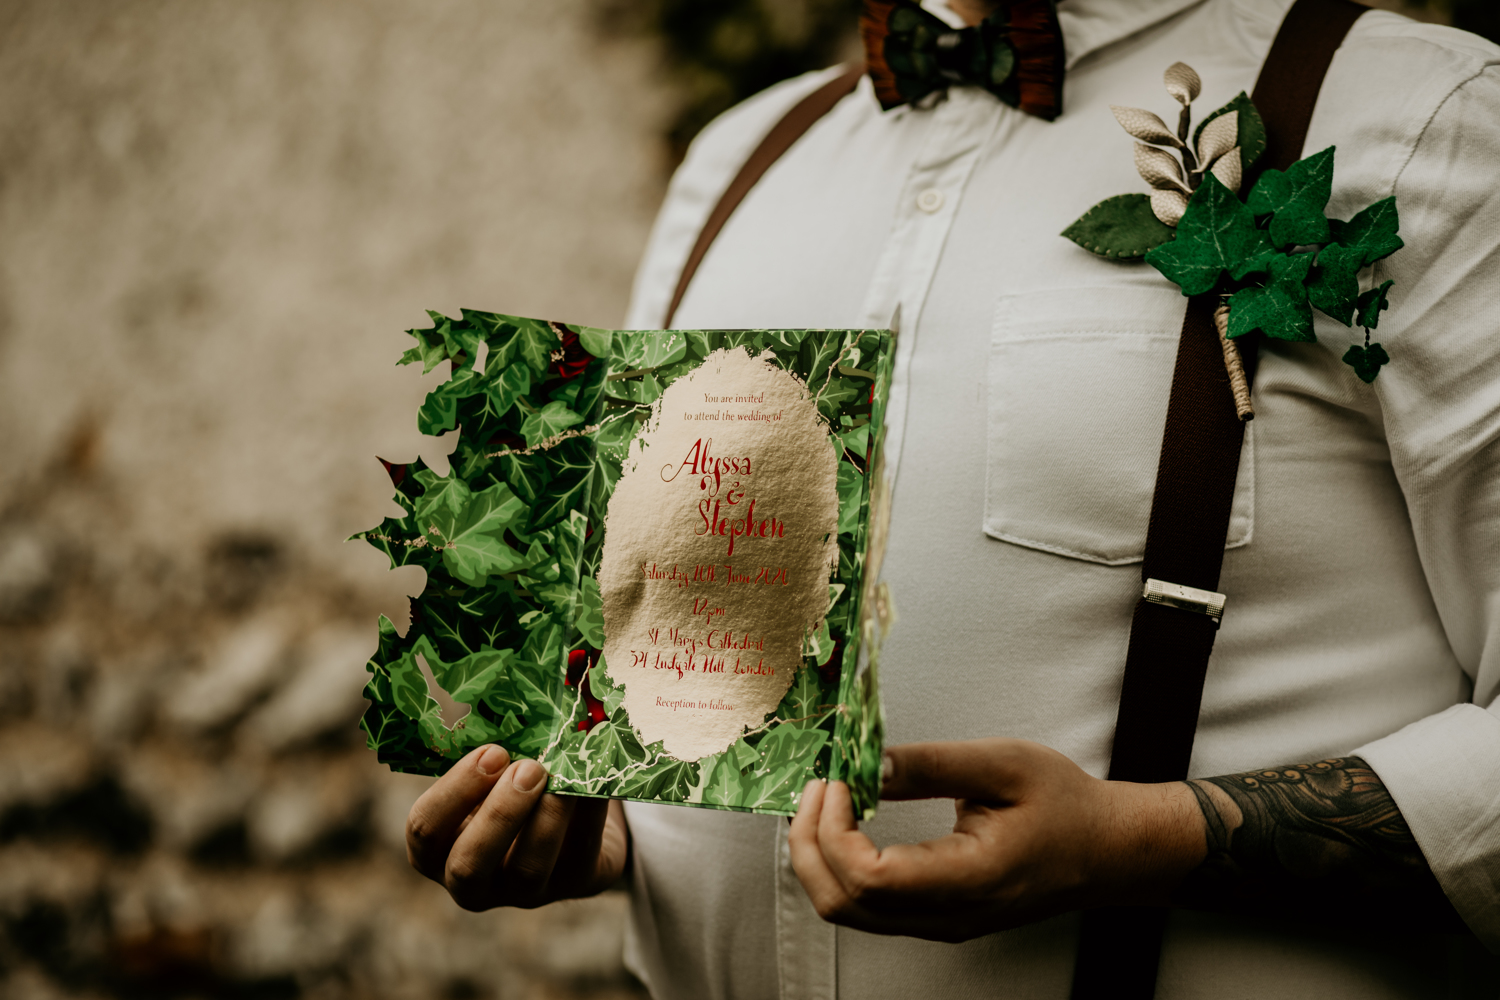 The wedding stationery and decor were inspired by the Snow White fairytale